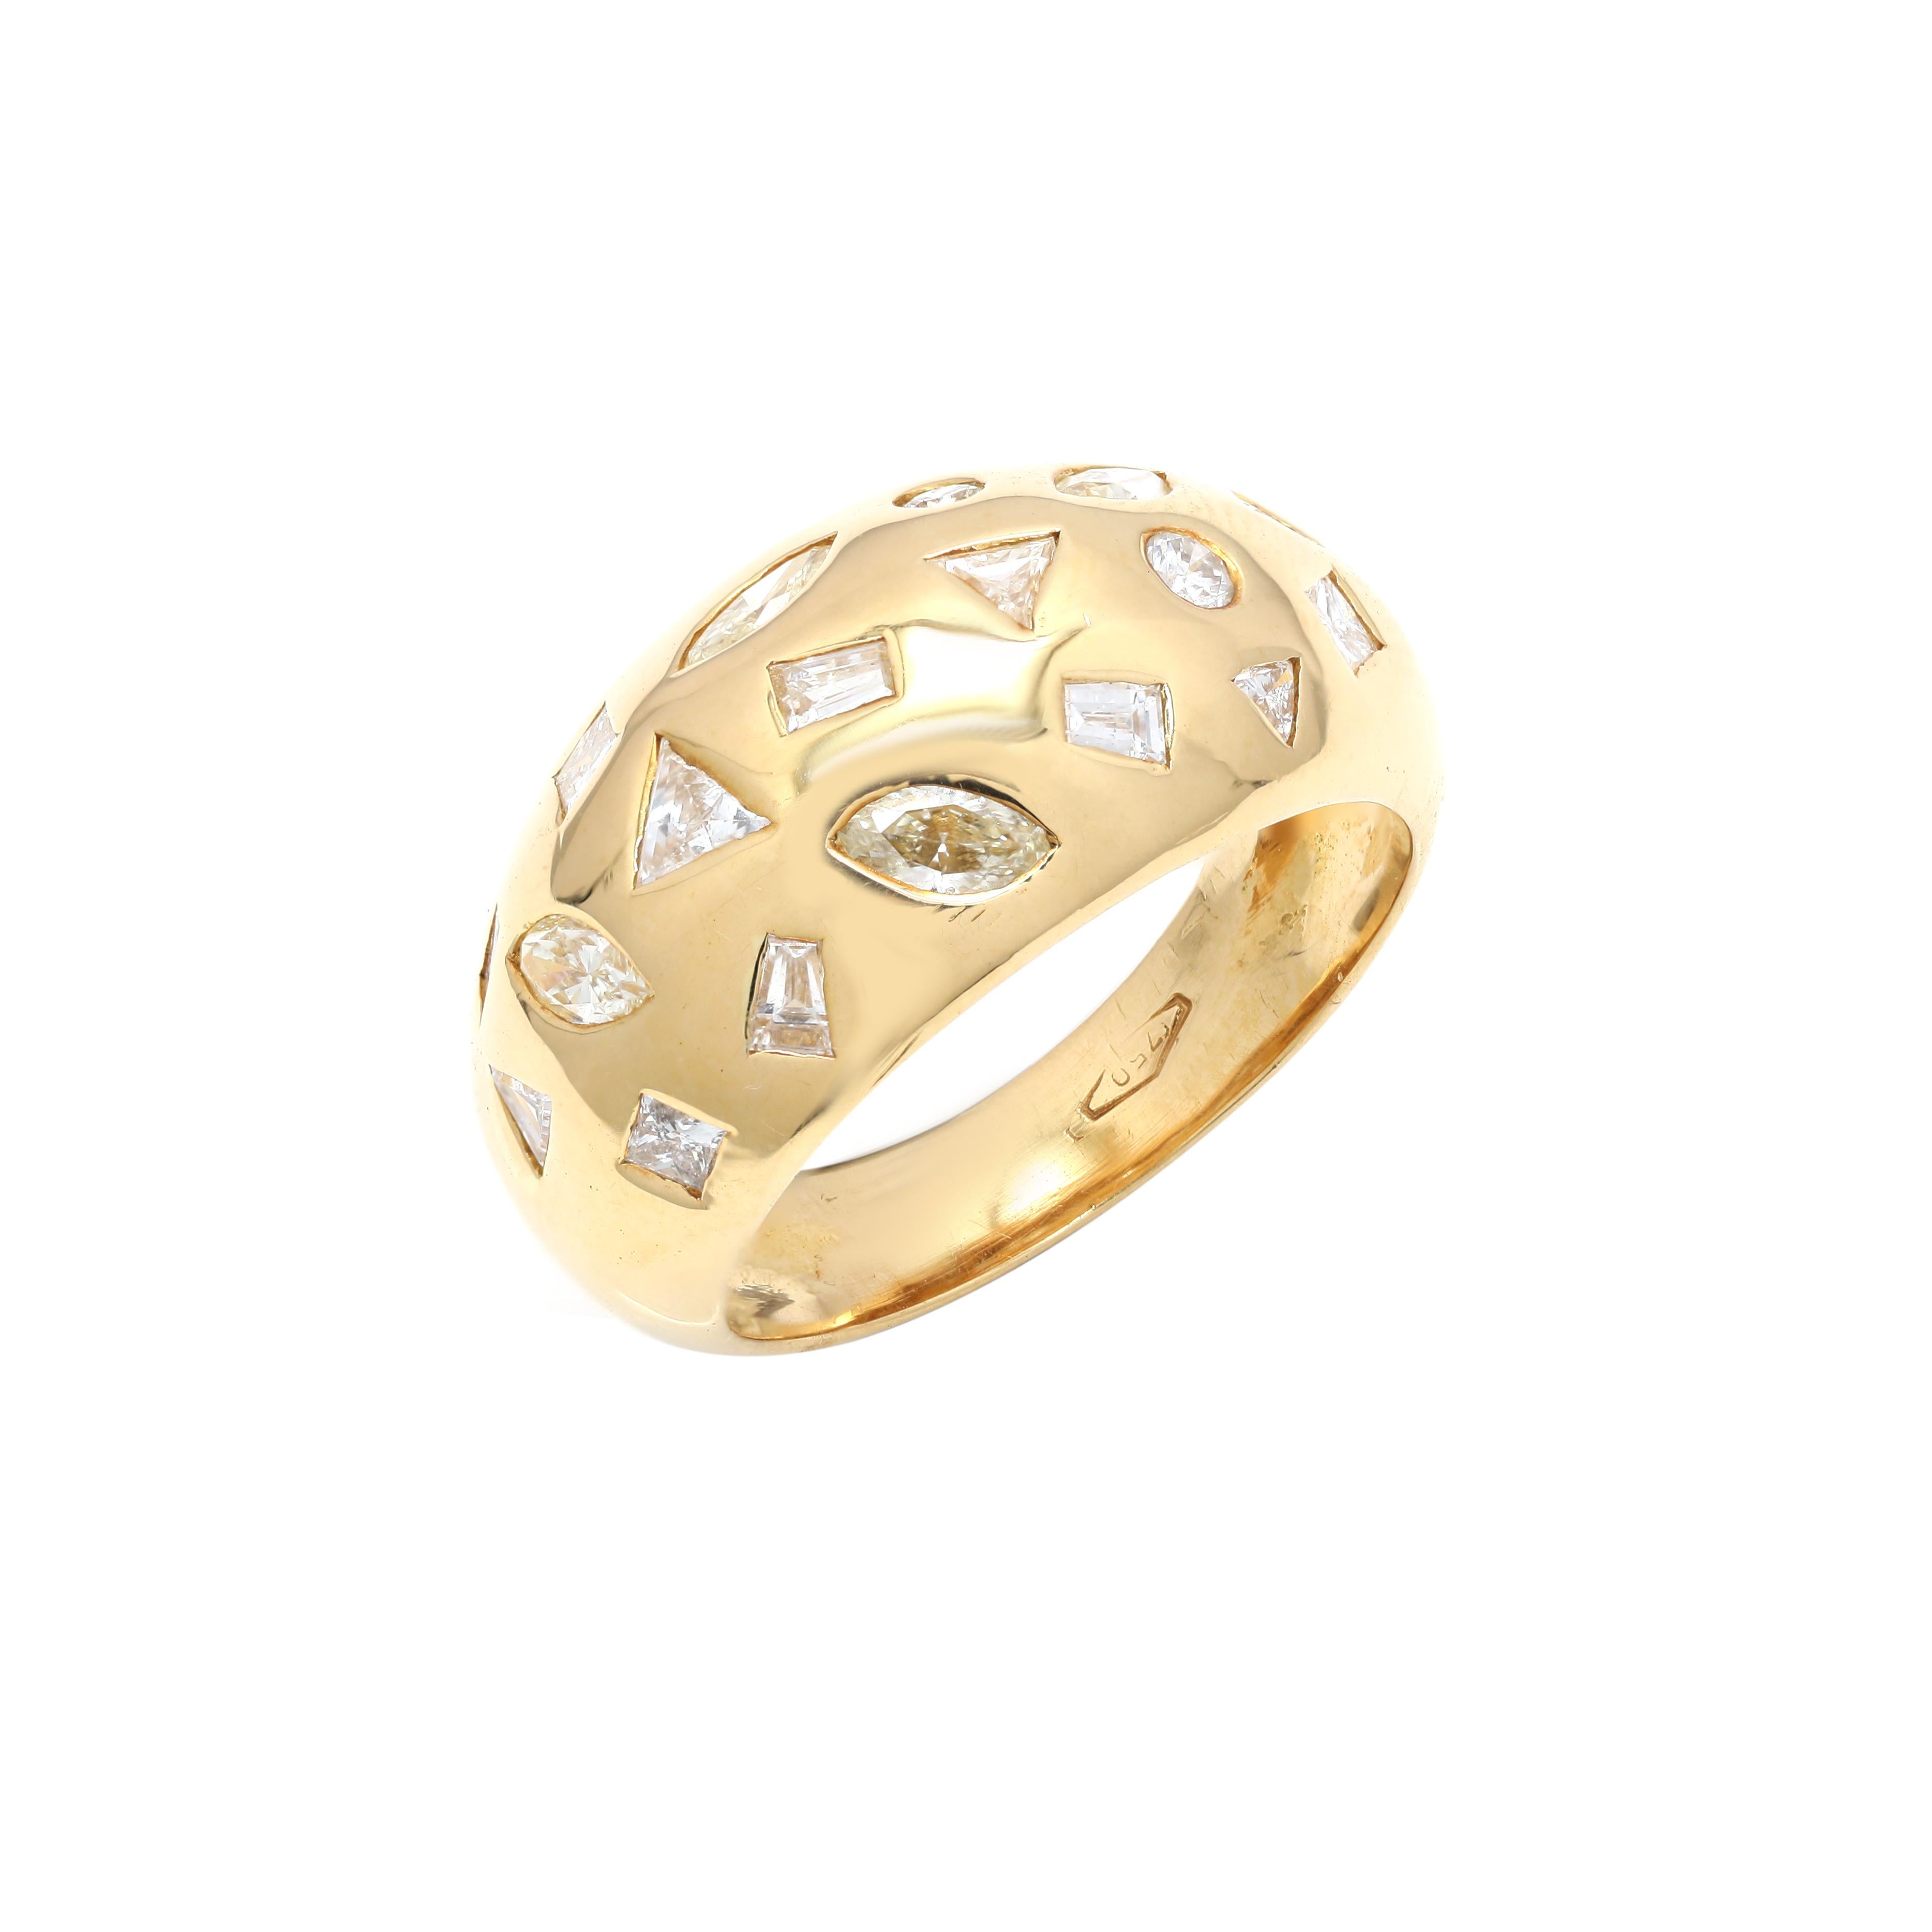 For Sale:  Genuine Diamond Celestial Dome Ring in Solid 18K Yellow Gold for Him 5